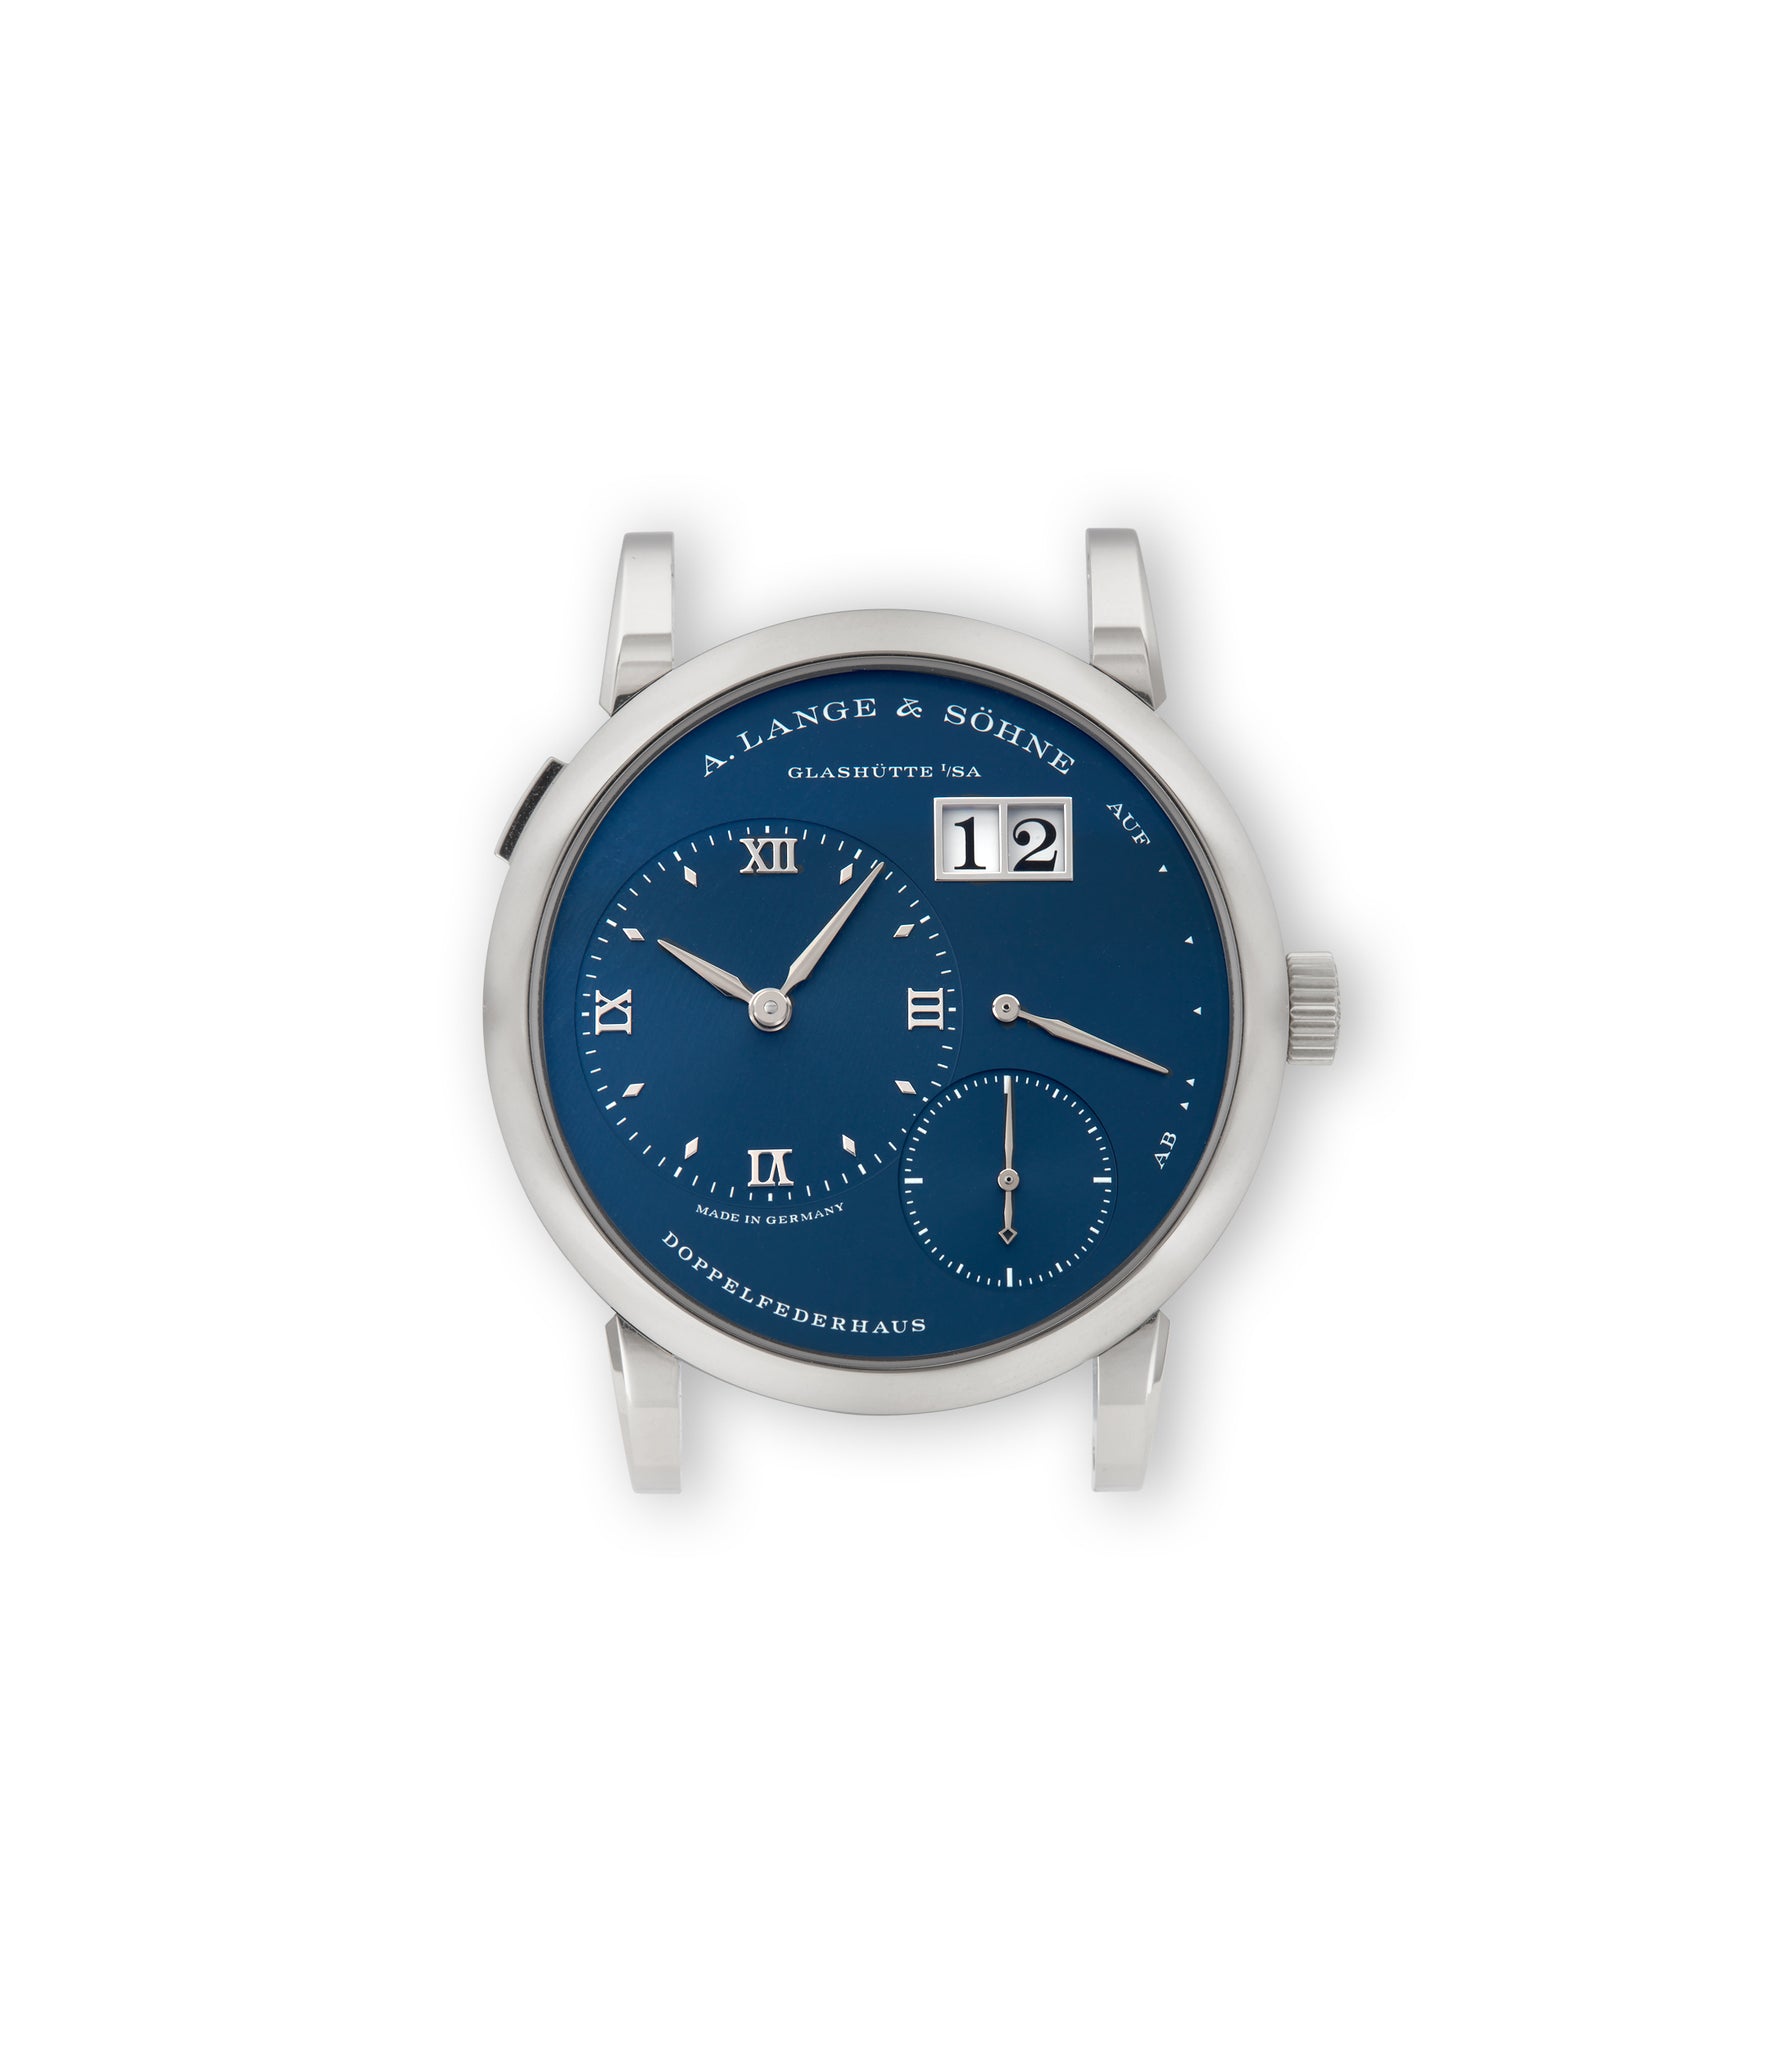 Front Dial case | A. Lange & Söhne | Lange 1 Blue Series | 191.028 | White Gold | Available worldwide at A Collected Man